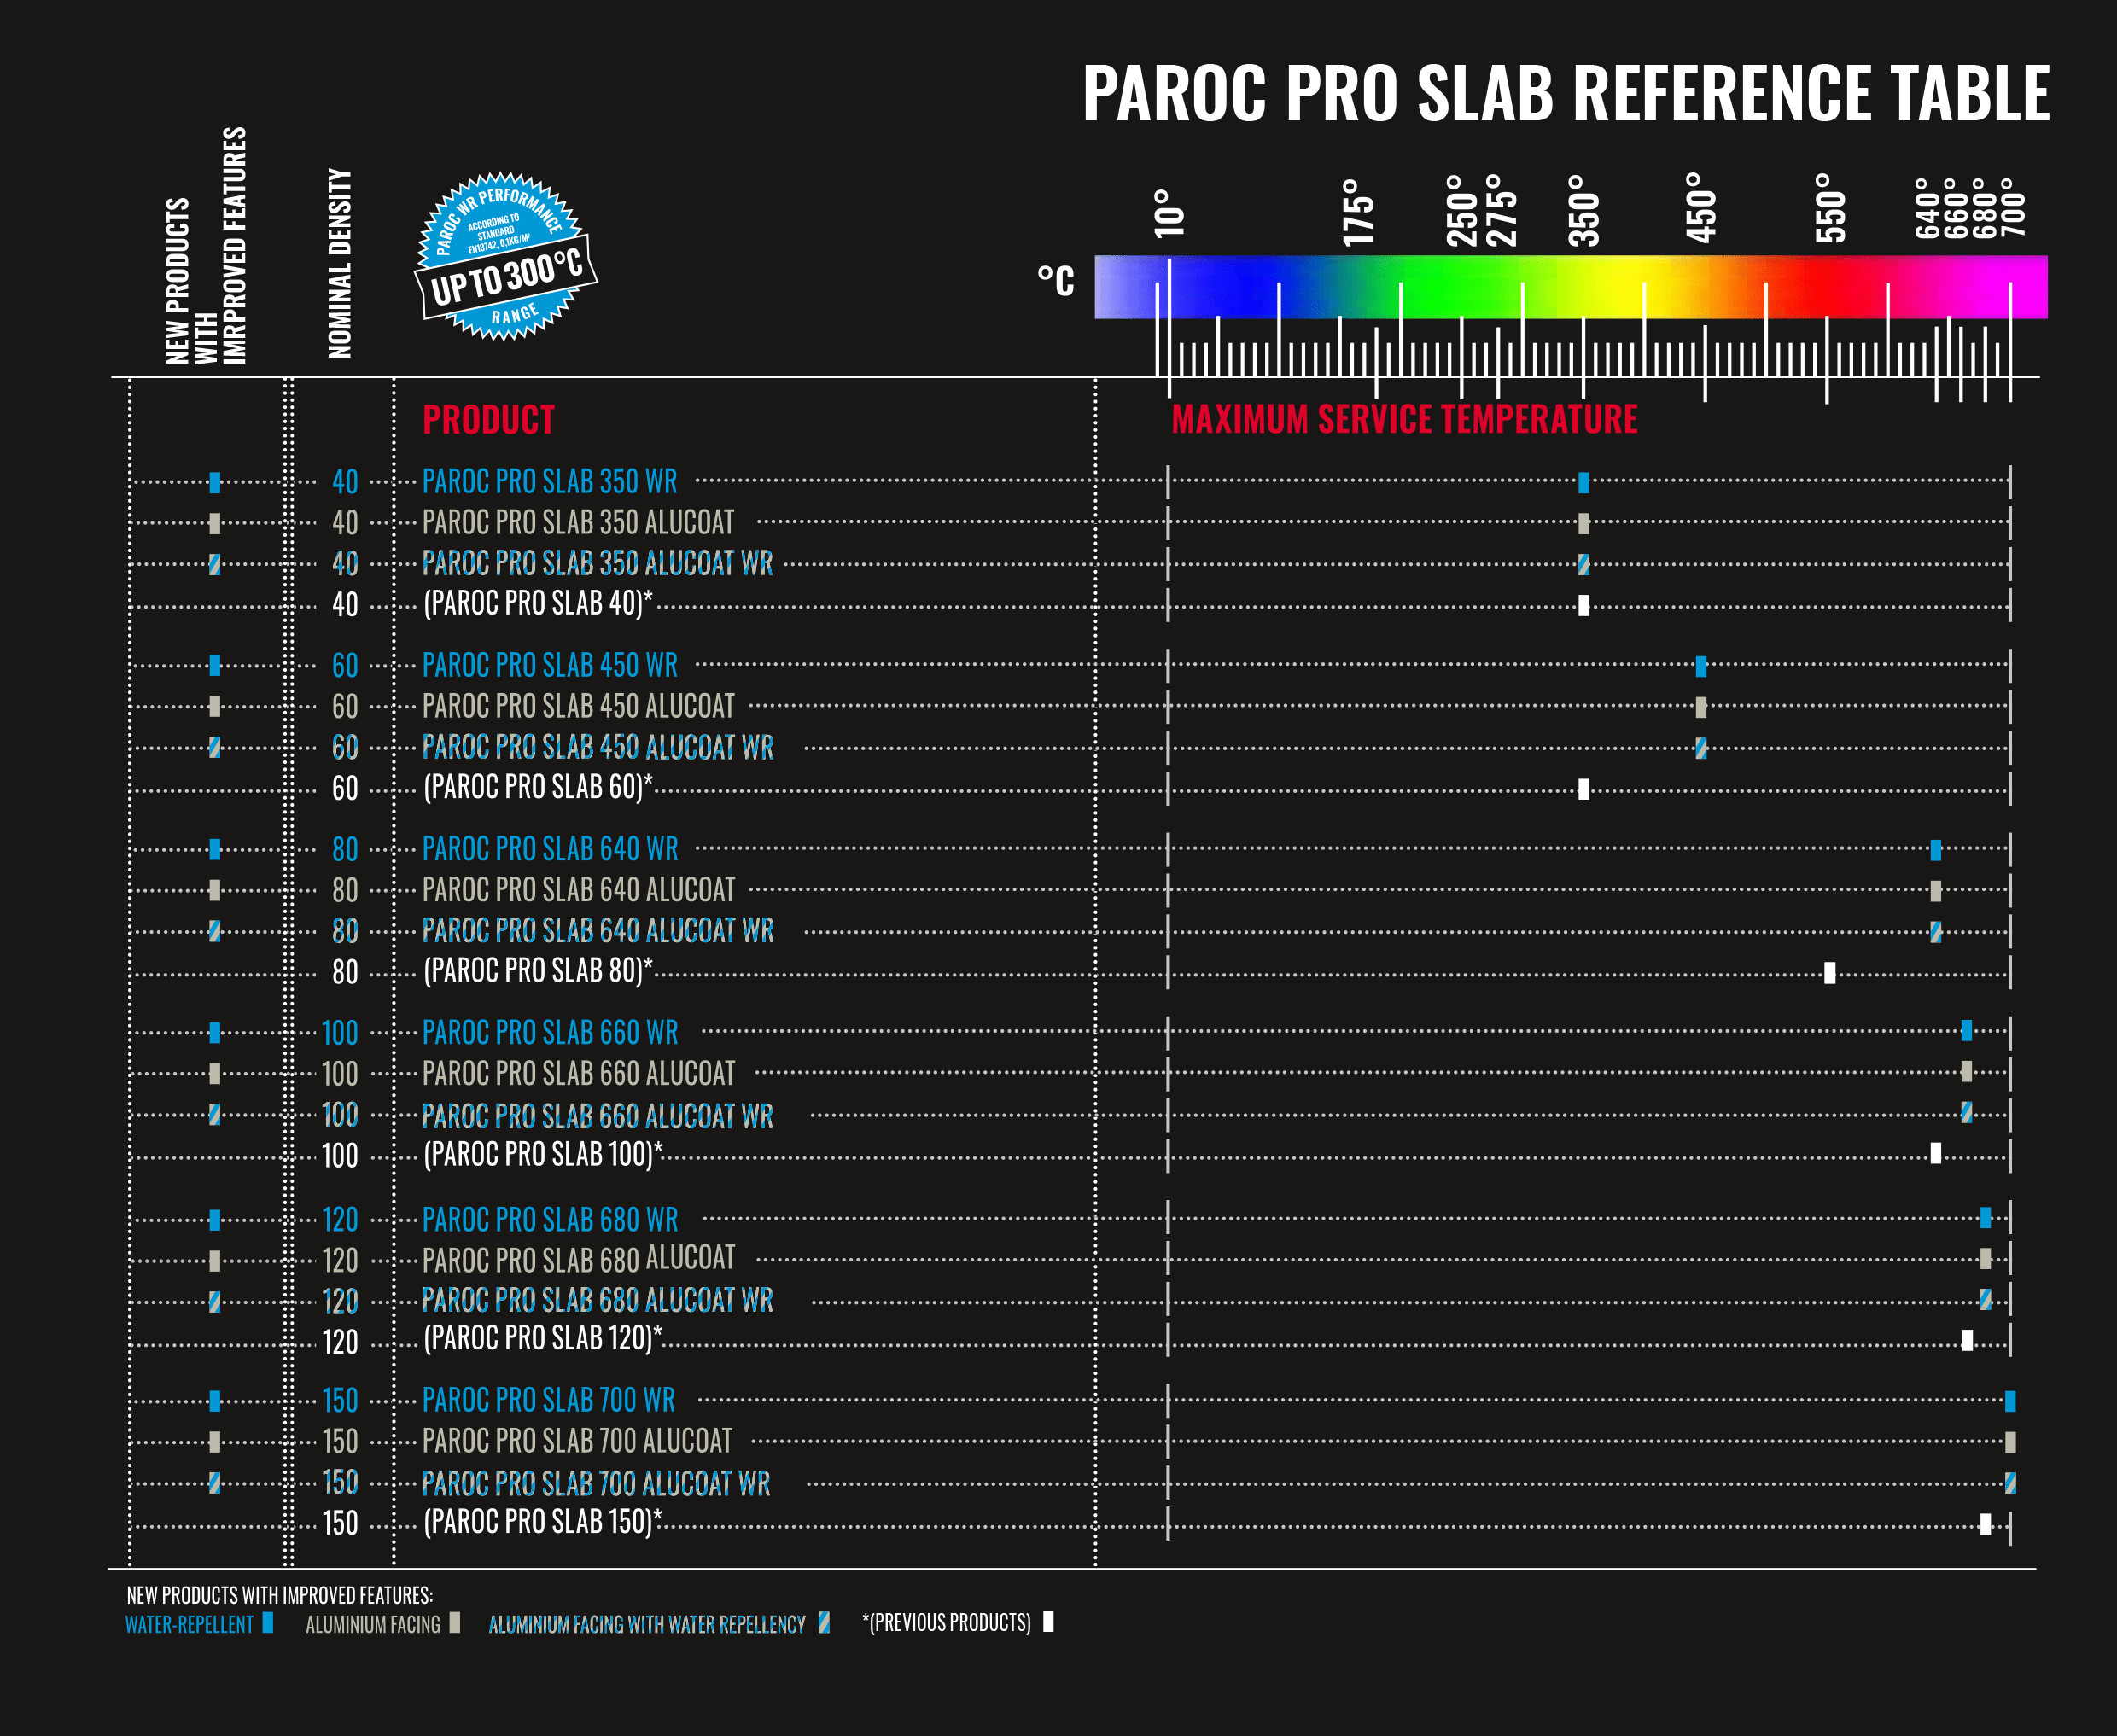 PAROC-Pro-Slabs-reference-table